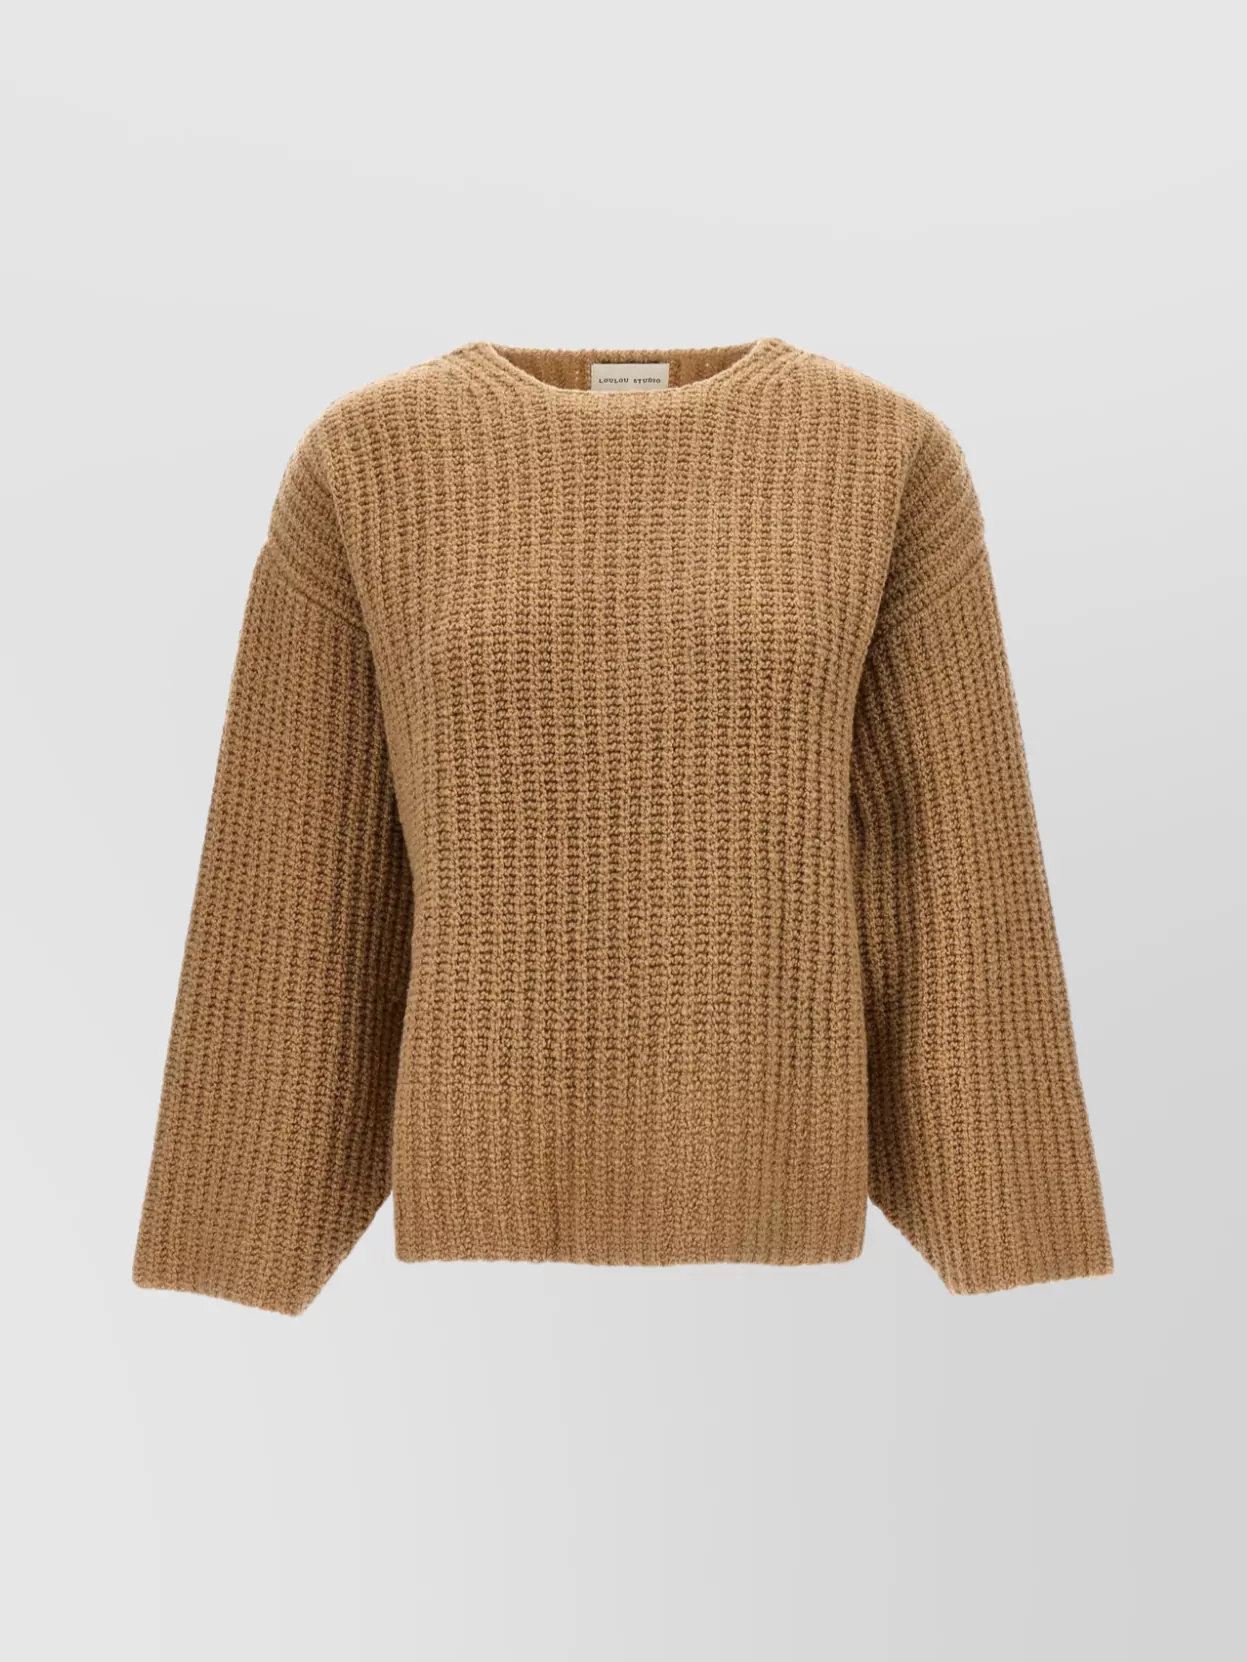 Loulou Studio 'lola' Ribbed Knit Sweater With Dropped Shoulders In Brown